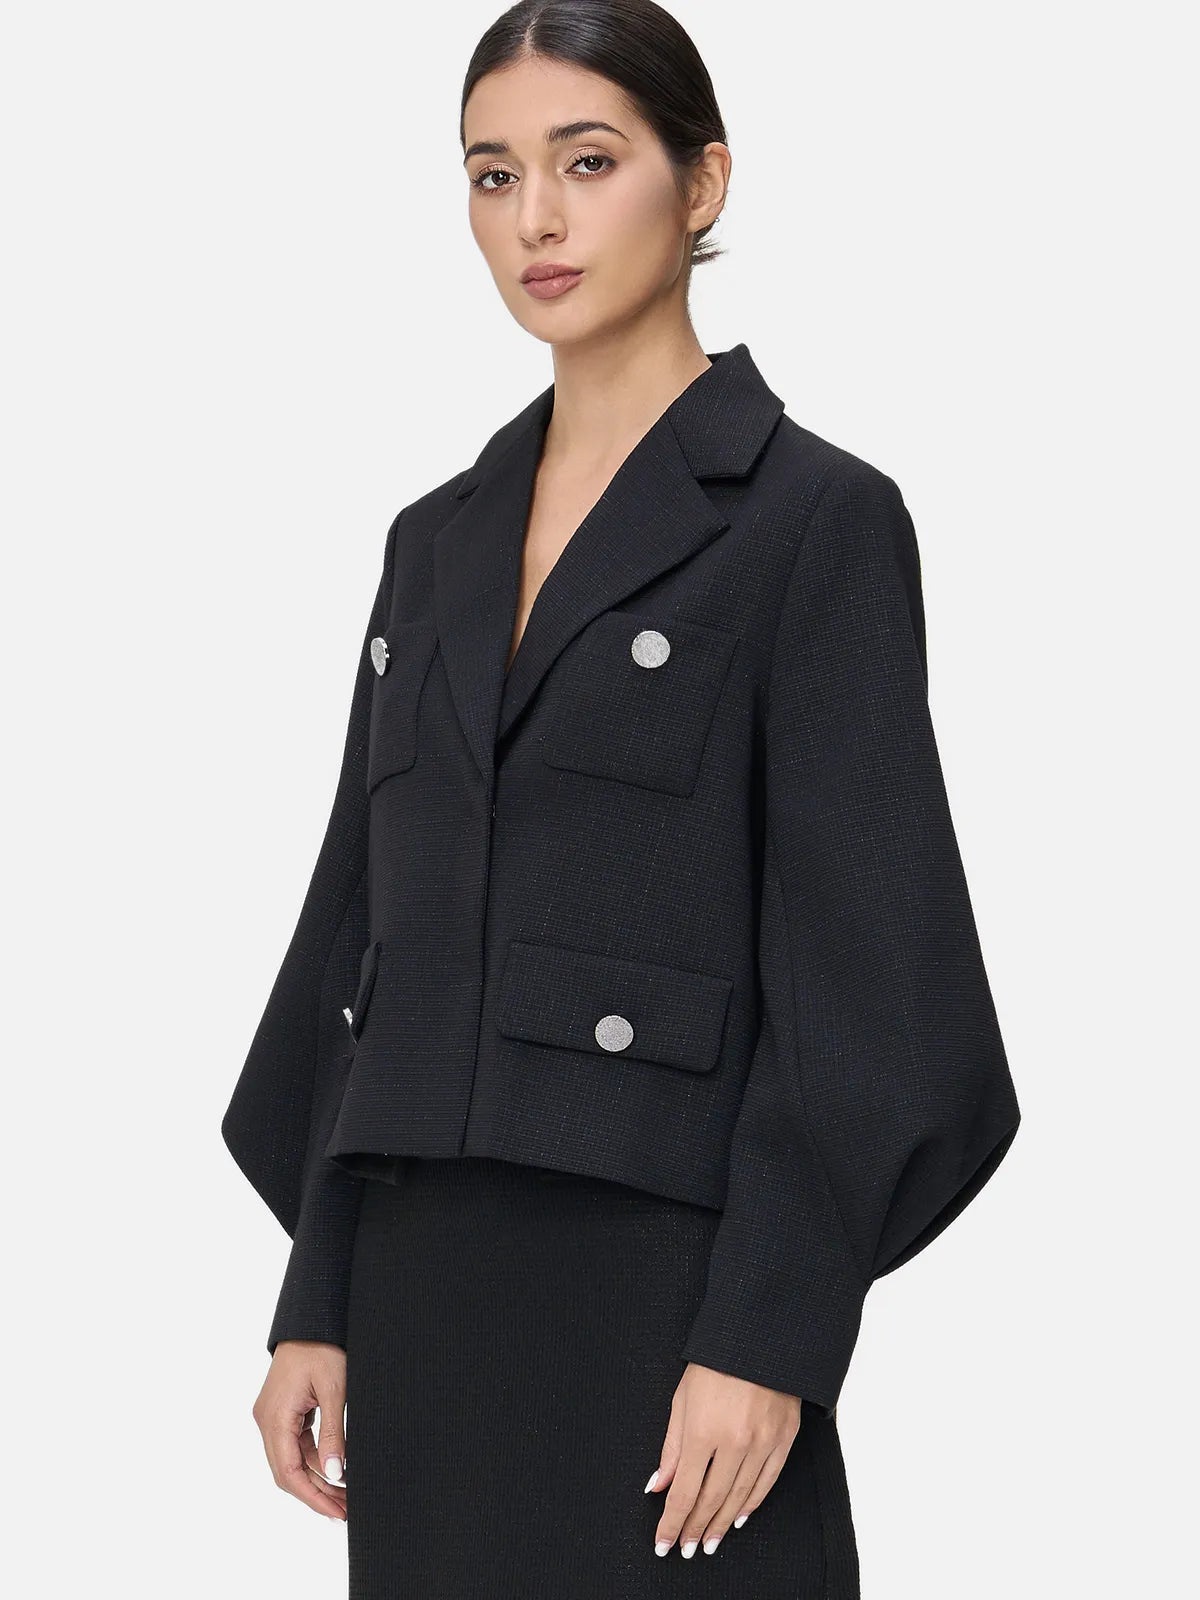 Discover timeless elegance in this black outerwear, where the classic lapel meets a trendy V-neck, complemented by the whimsy of lantern sleeves.